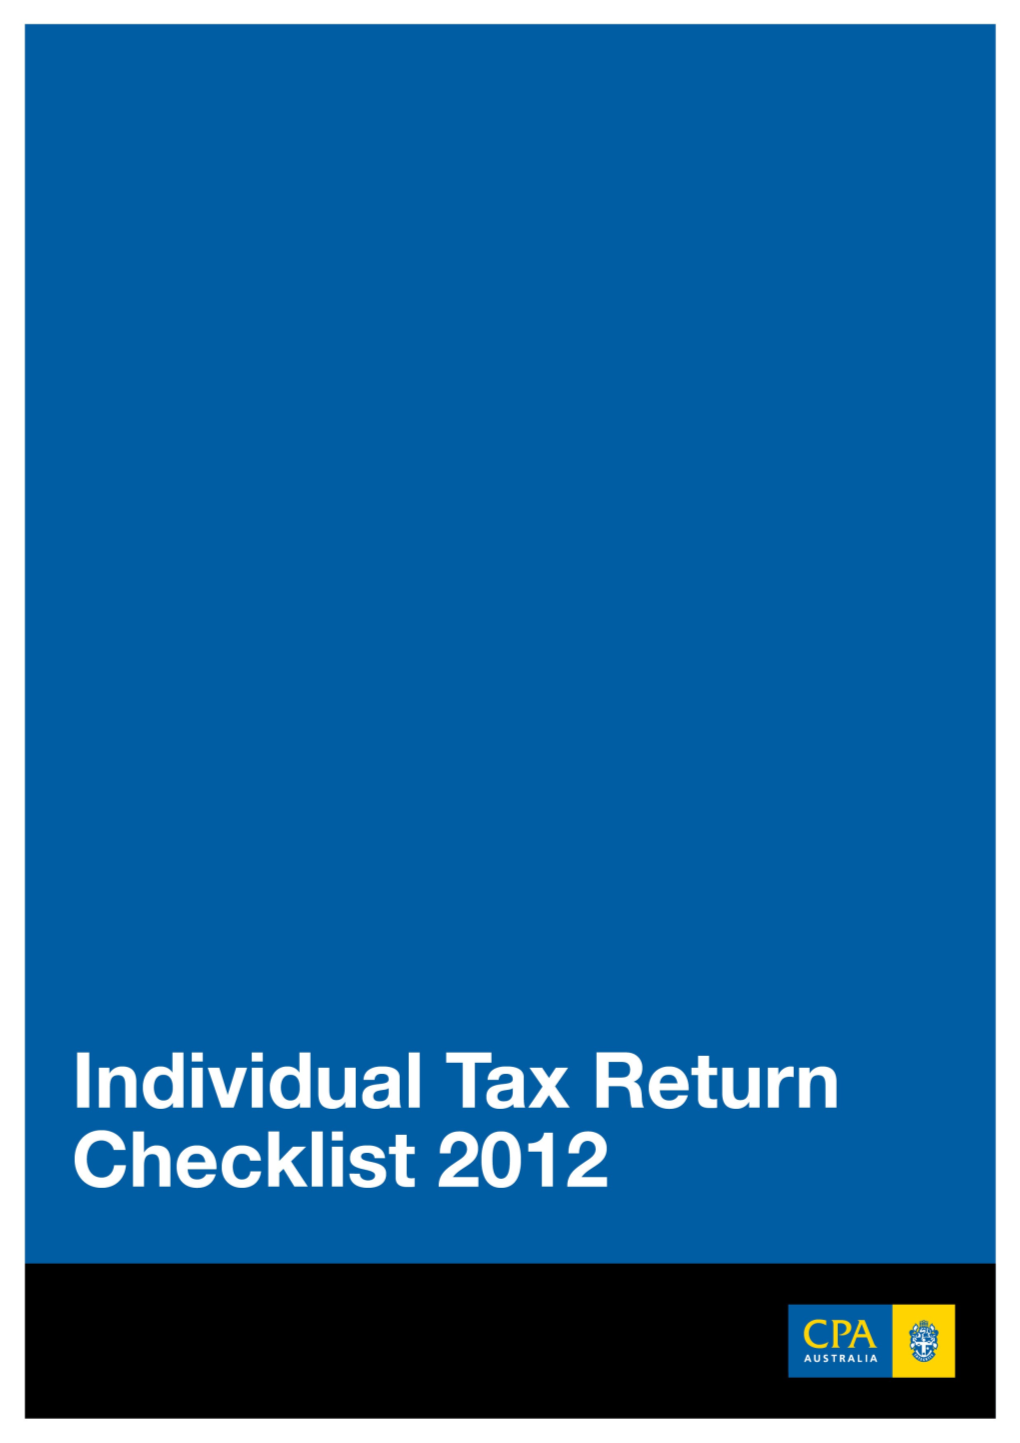 This Checklist, Prepared by Moore Stephens on Behalf of CPA Australia, Will Assist Public